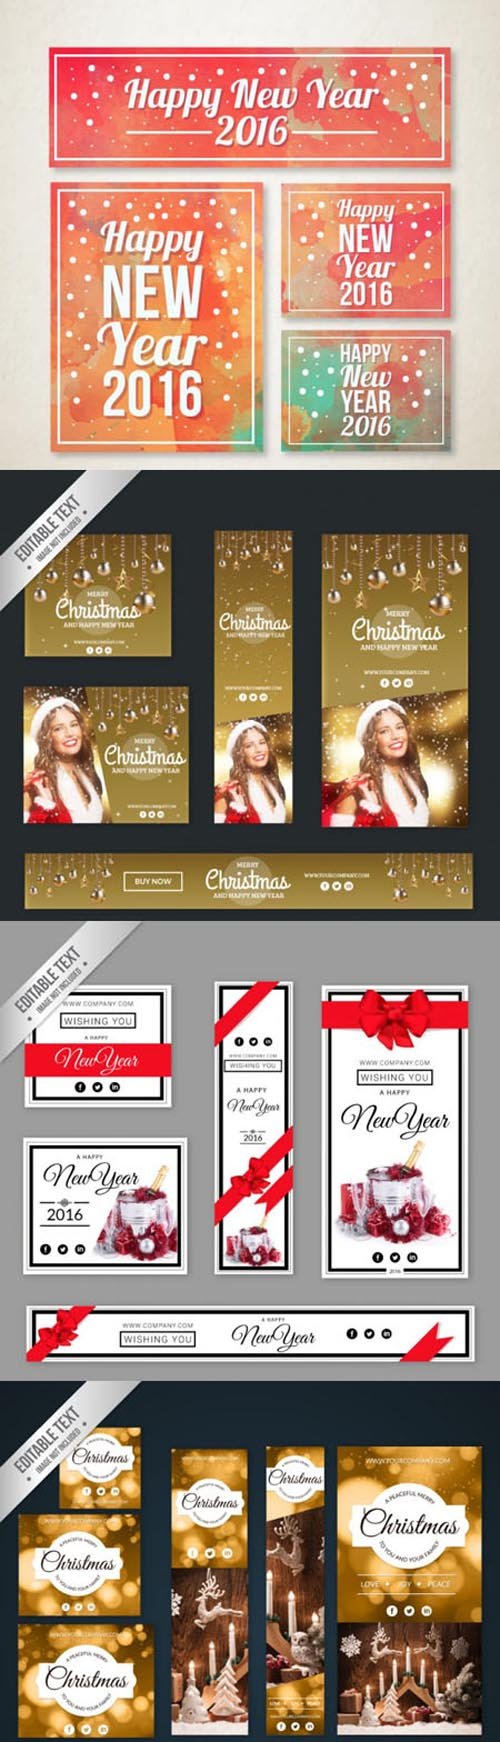 New Year 2016 Stationery Templates in Vector